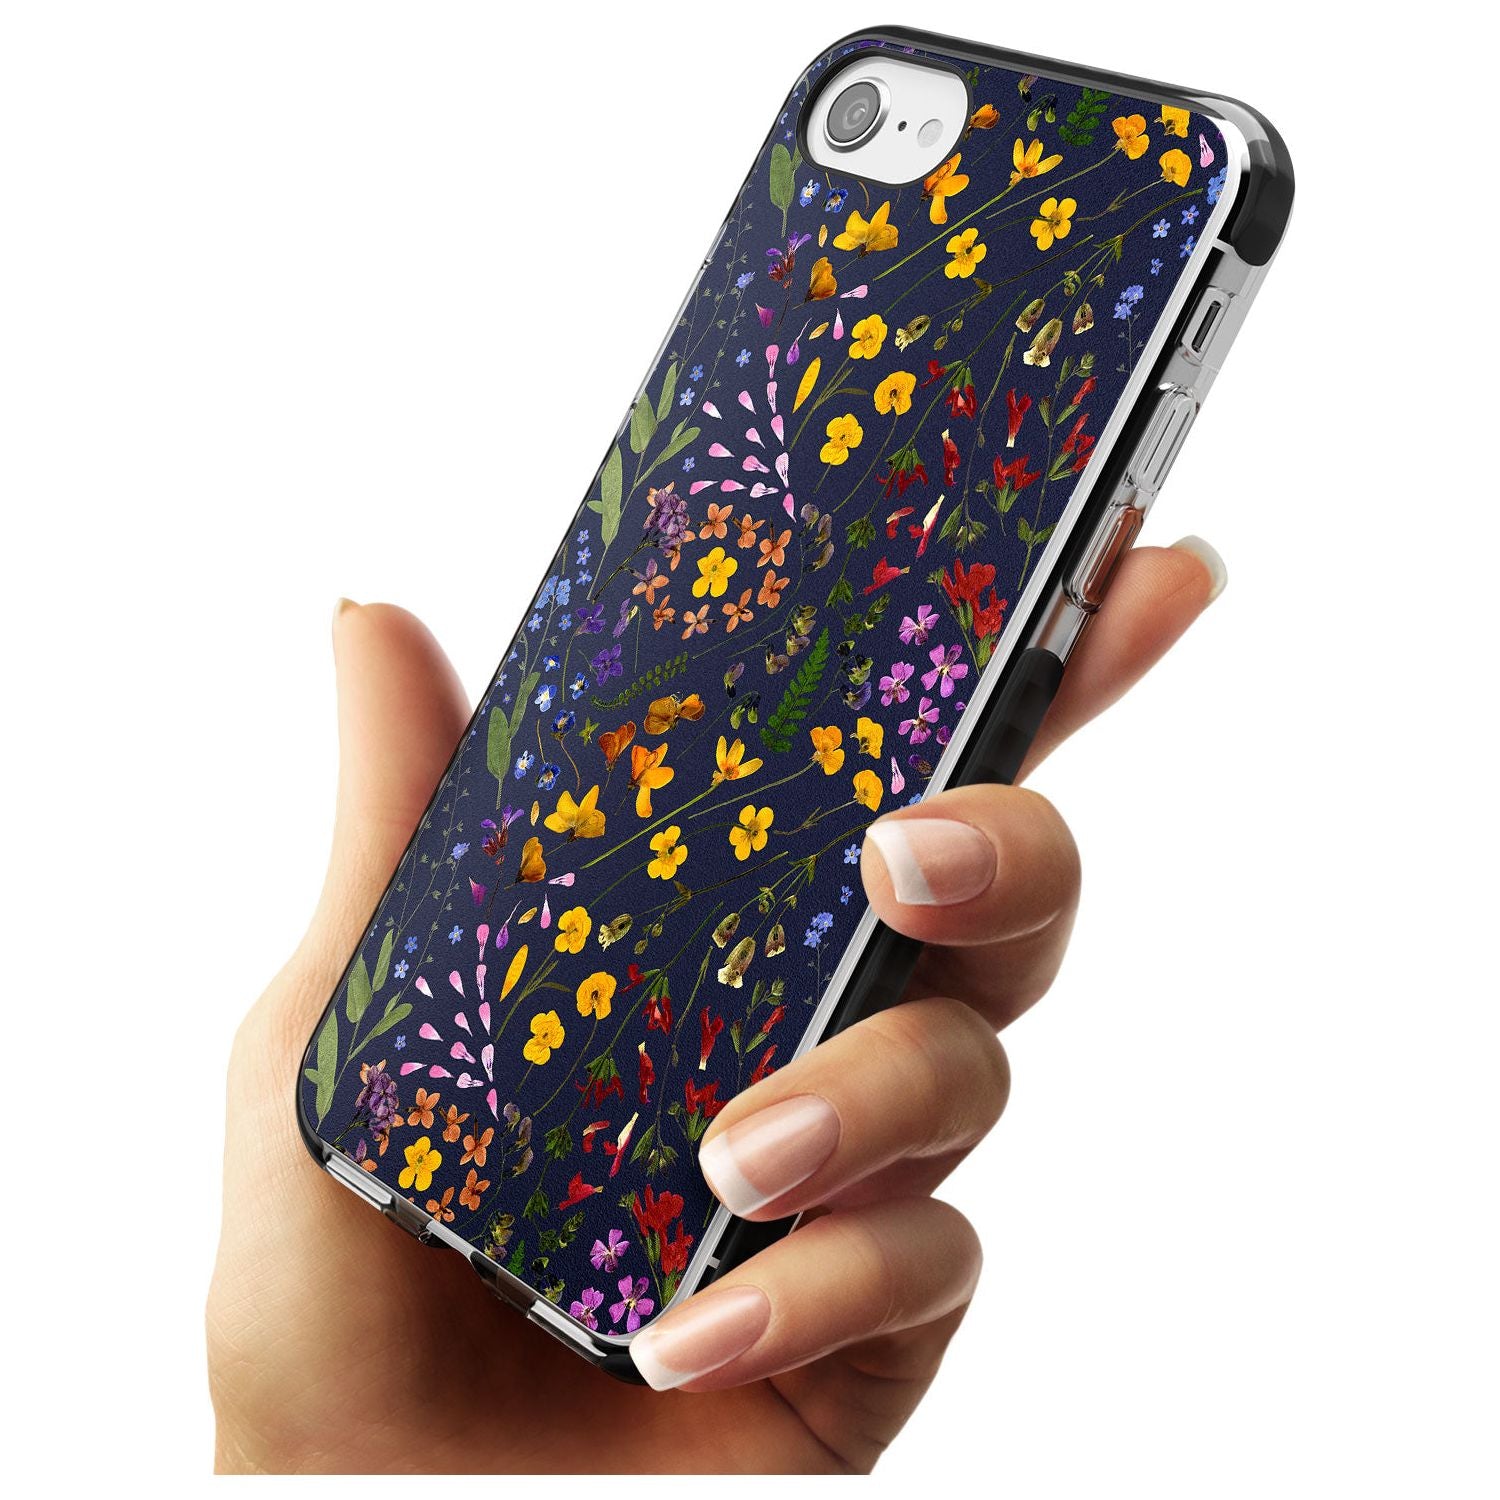 Wildflower & Leaves Cluster Design - Navy Black Impact Phone Case for iPhone SE 8 7 Plus